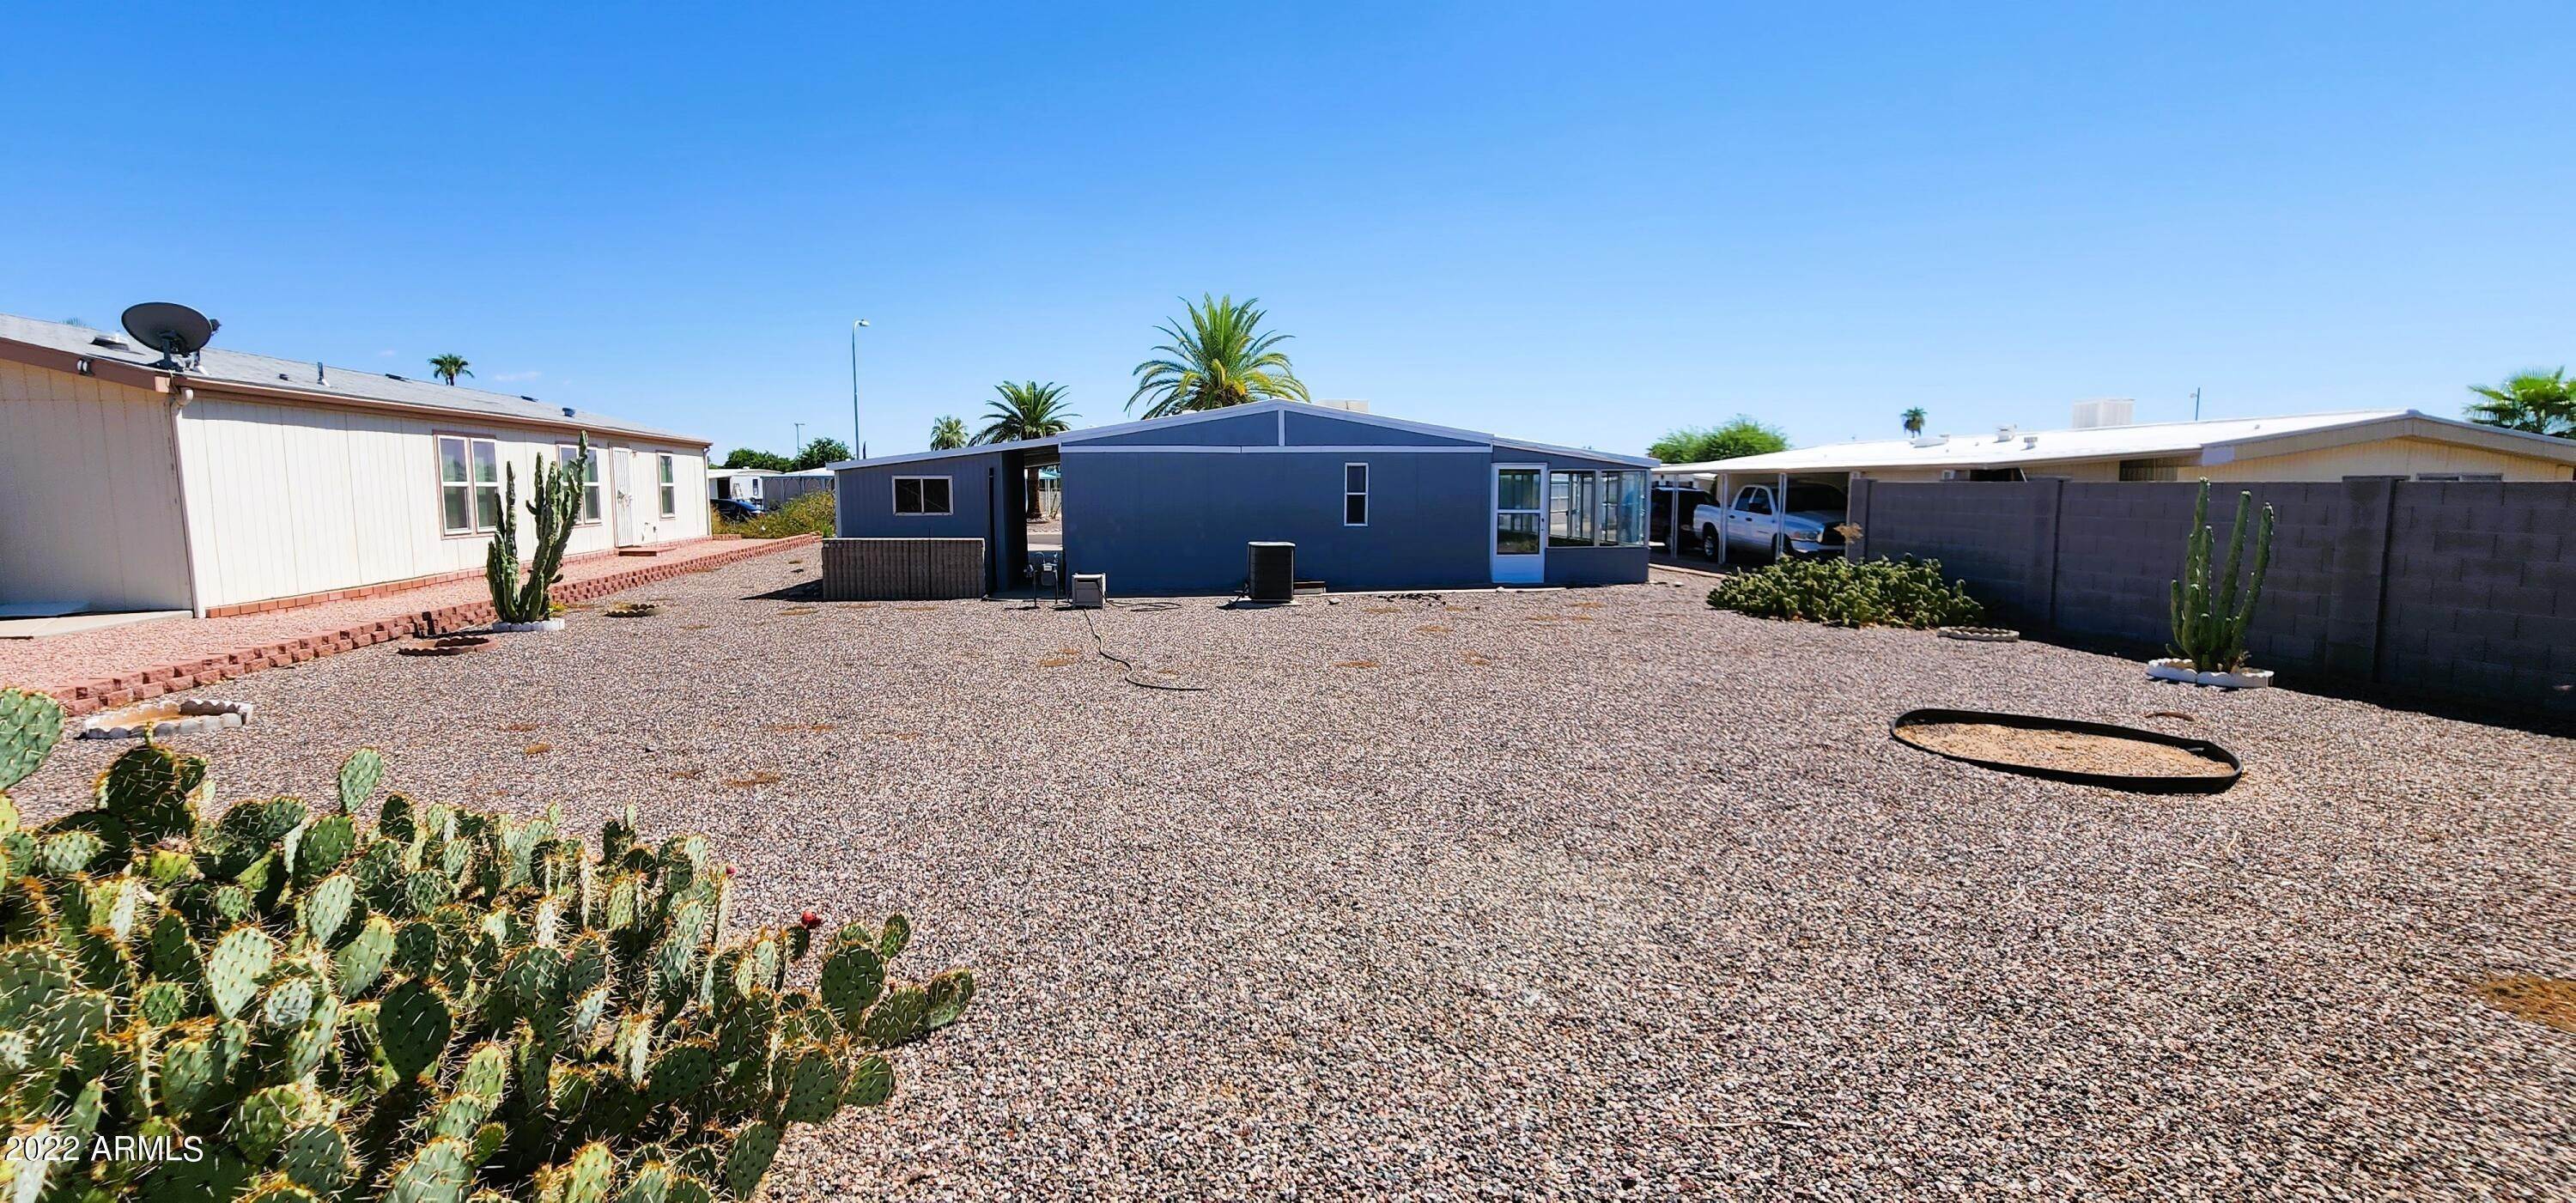 23. Manufactured Home for Sale at Mesa, AZ 85208